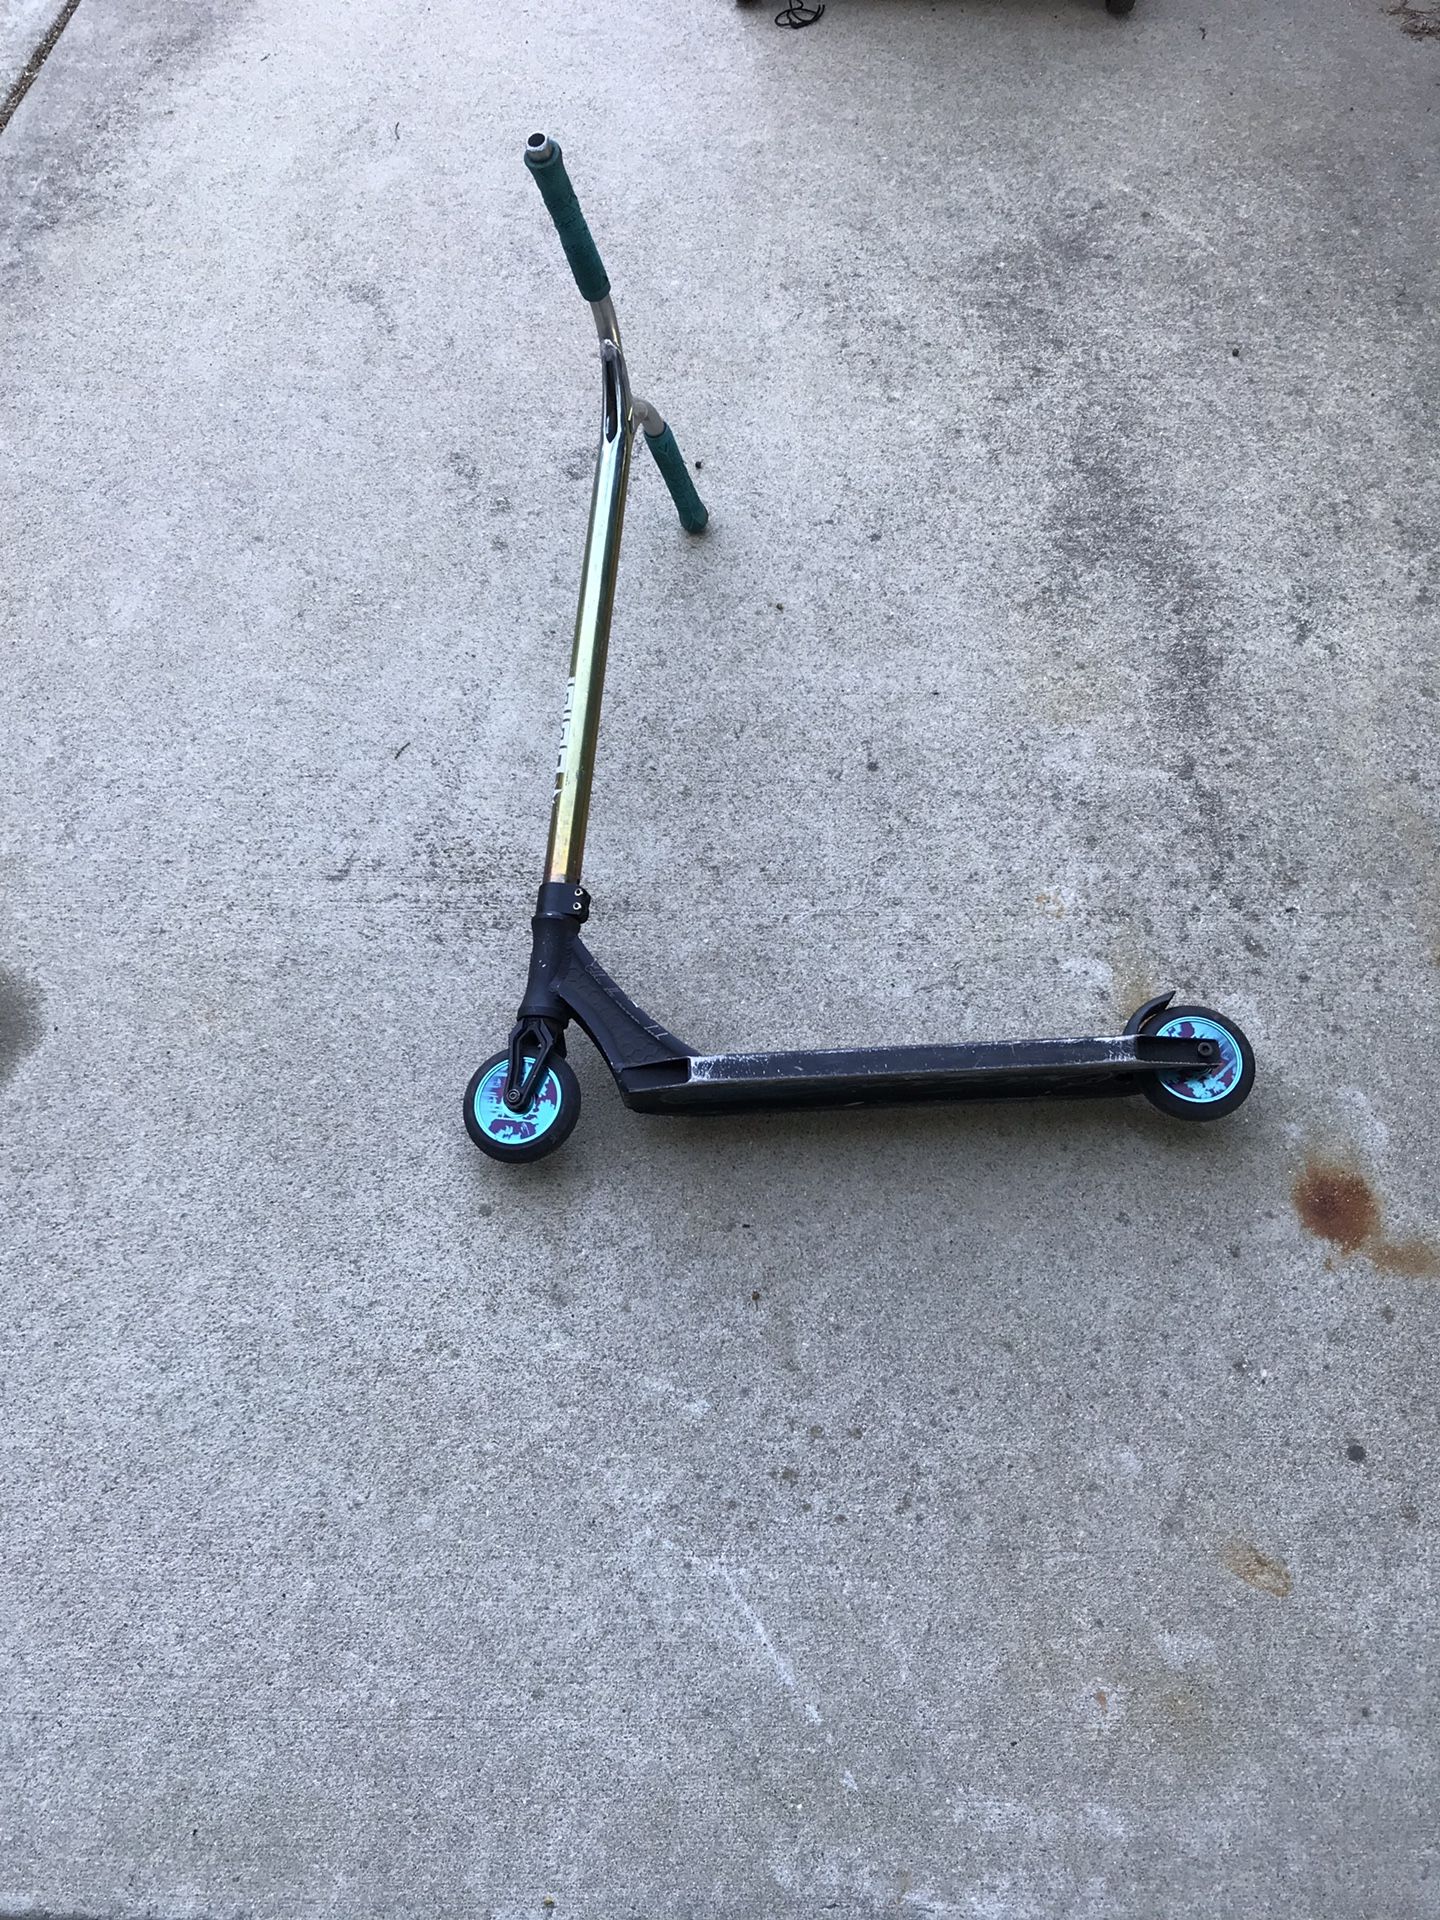 Professional stunt scooter